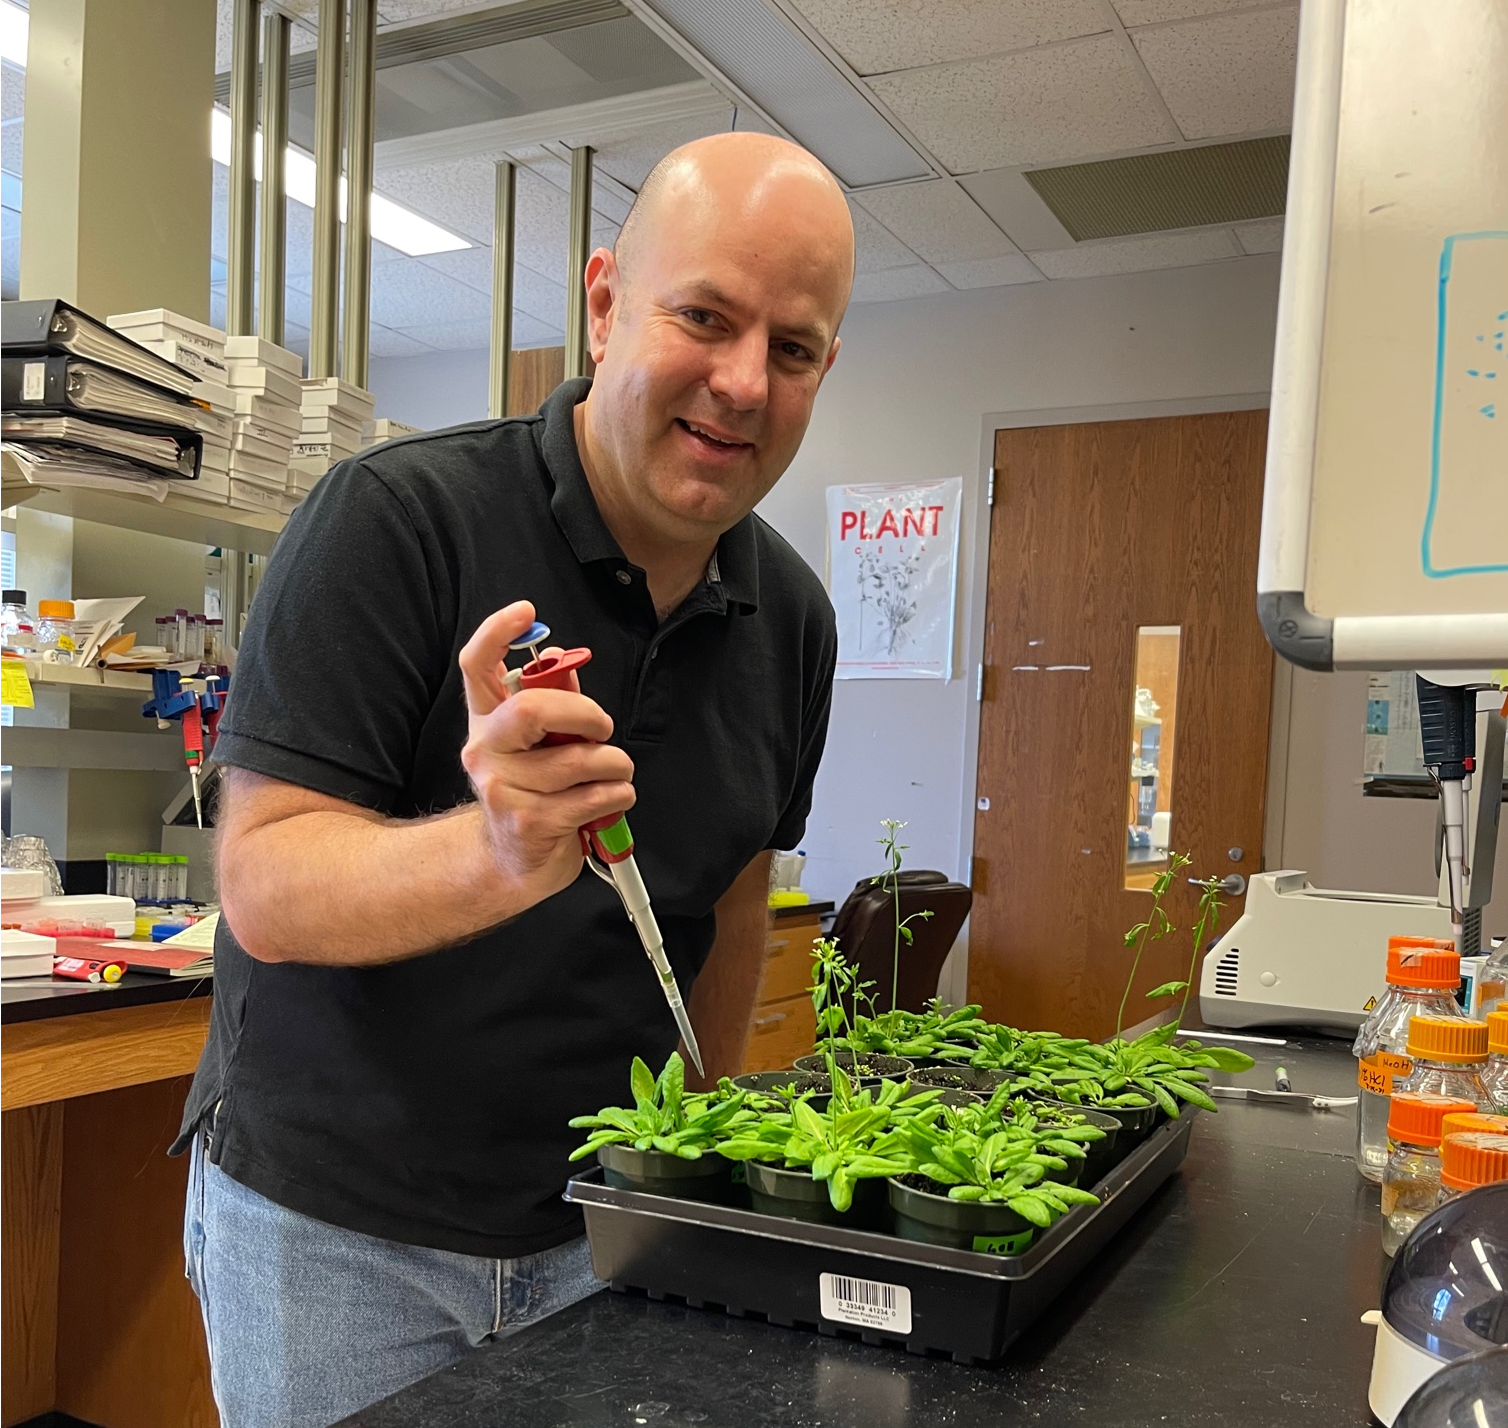 Aaron in his lab working with plants